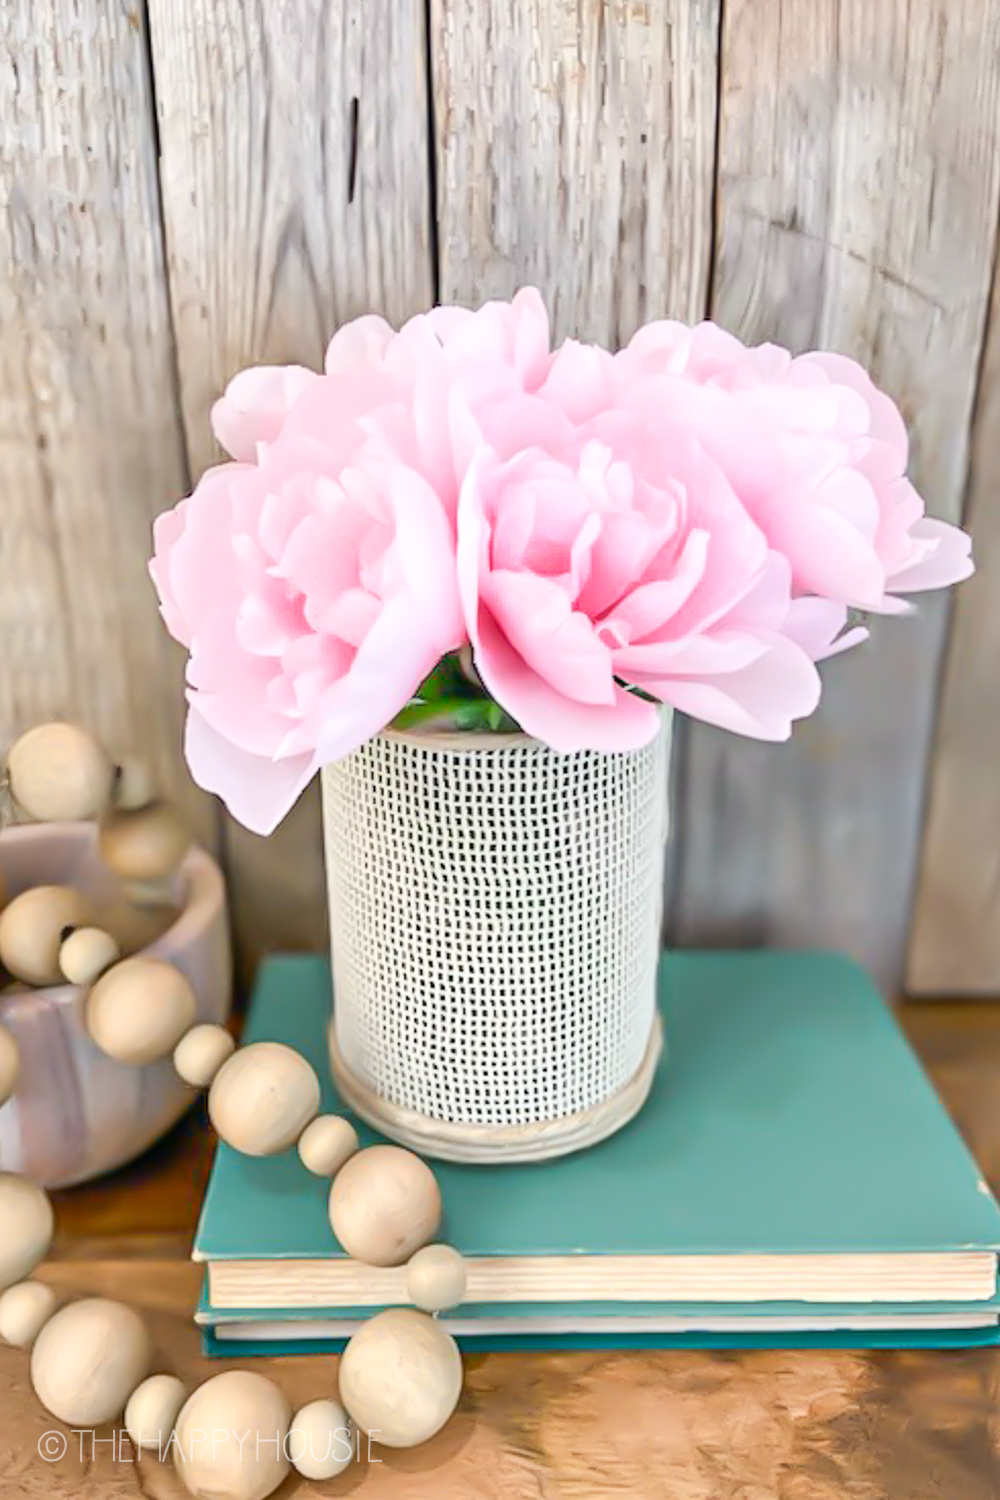 DIY Dollar Store Faux Cane Vase with Peonies